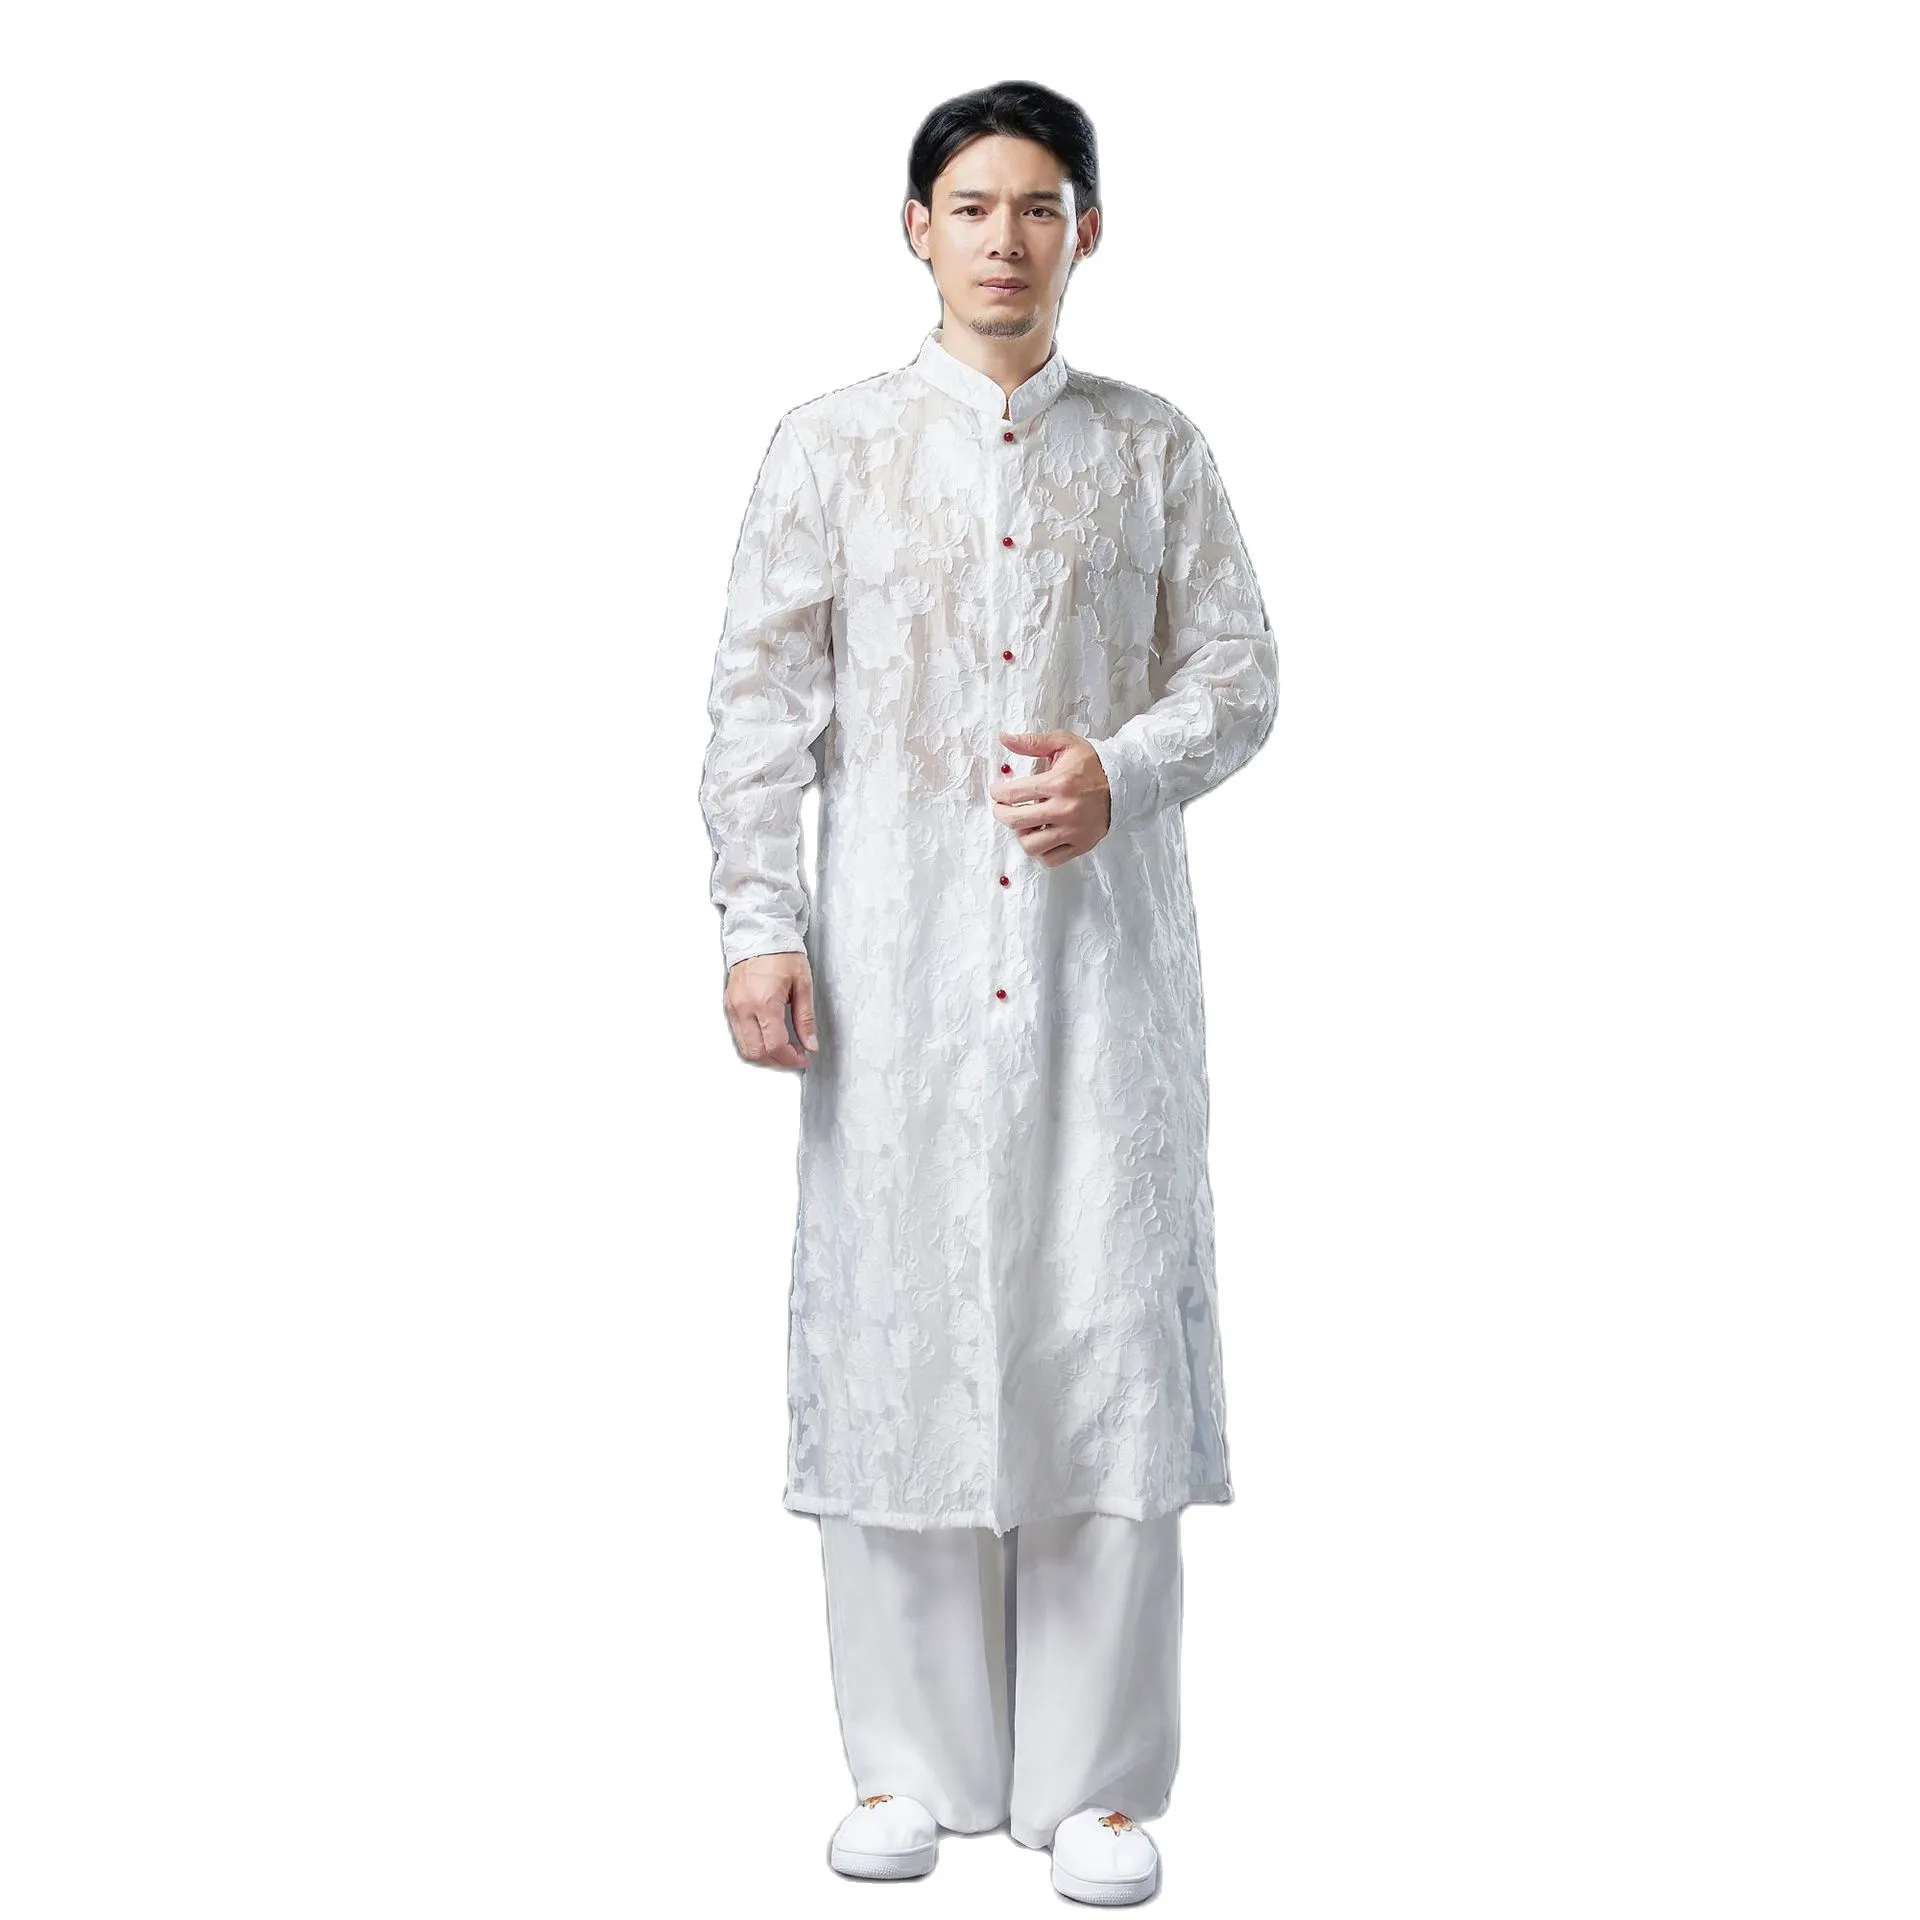 Chinese Ethnic Clothing black and white robe traditional male cheongsam Cotton gown stand collar men's vintage tang suit oriental costume